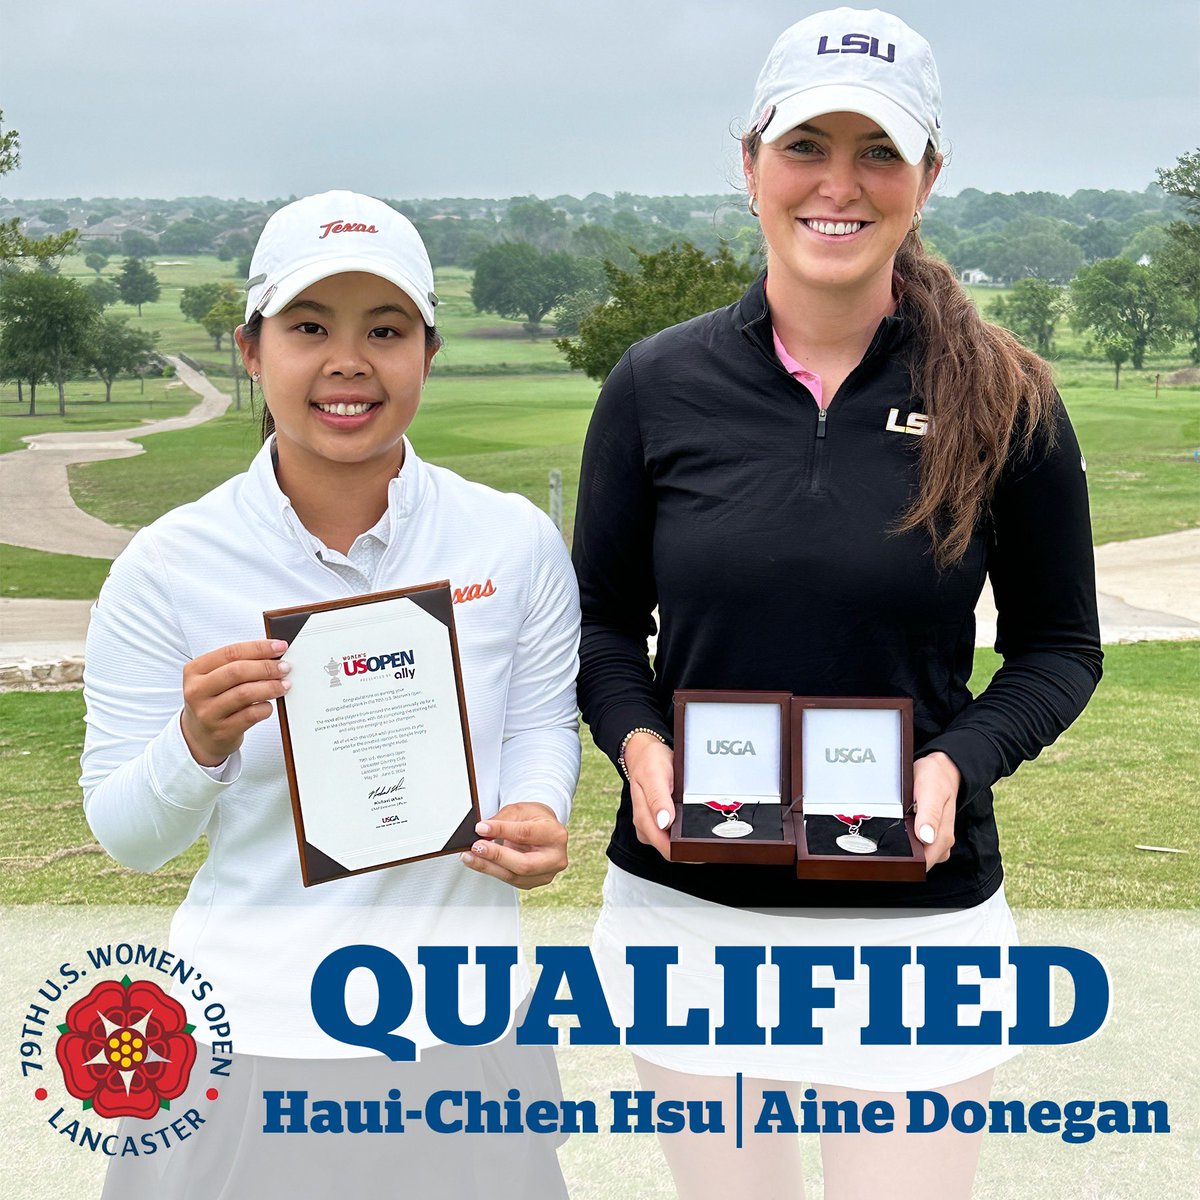 Congrats to medalist @DoneganAine of @LSUWomensGolf and runner-up Huai-Chien Hsu of @TexasWGolf on qualifying for the 79th @uswomensopen yesterday at Rockwall Golf & Athletic Club! 👏👏👏